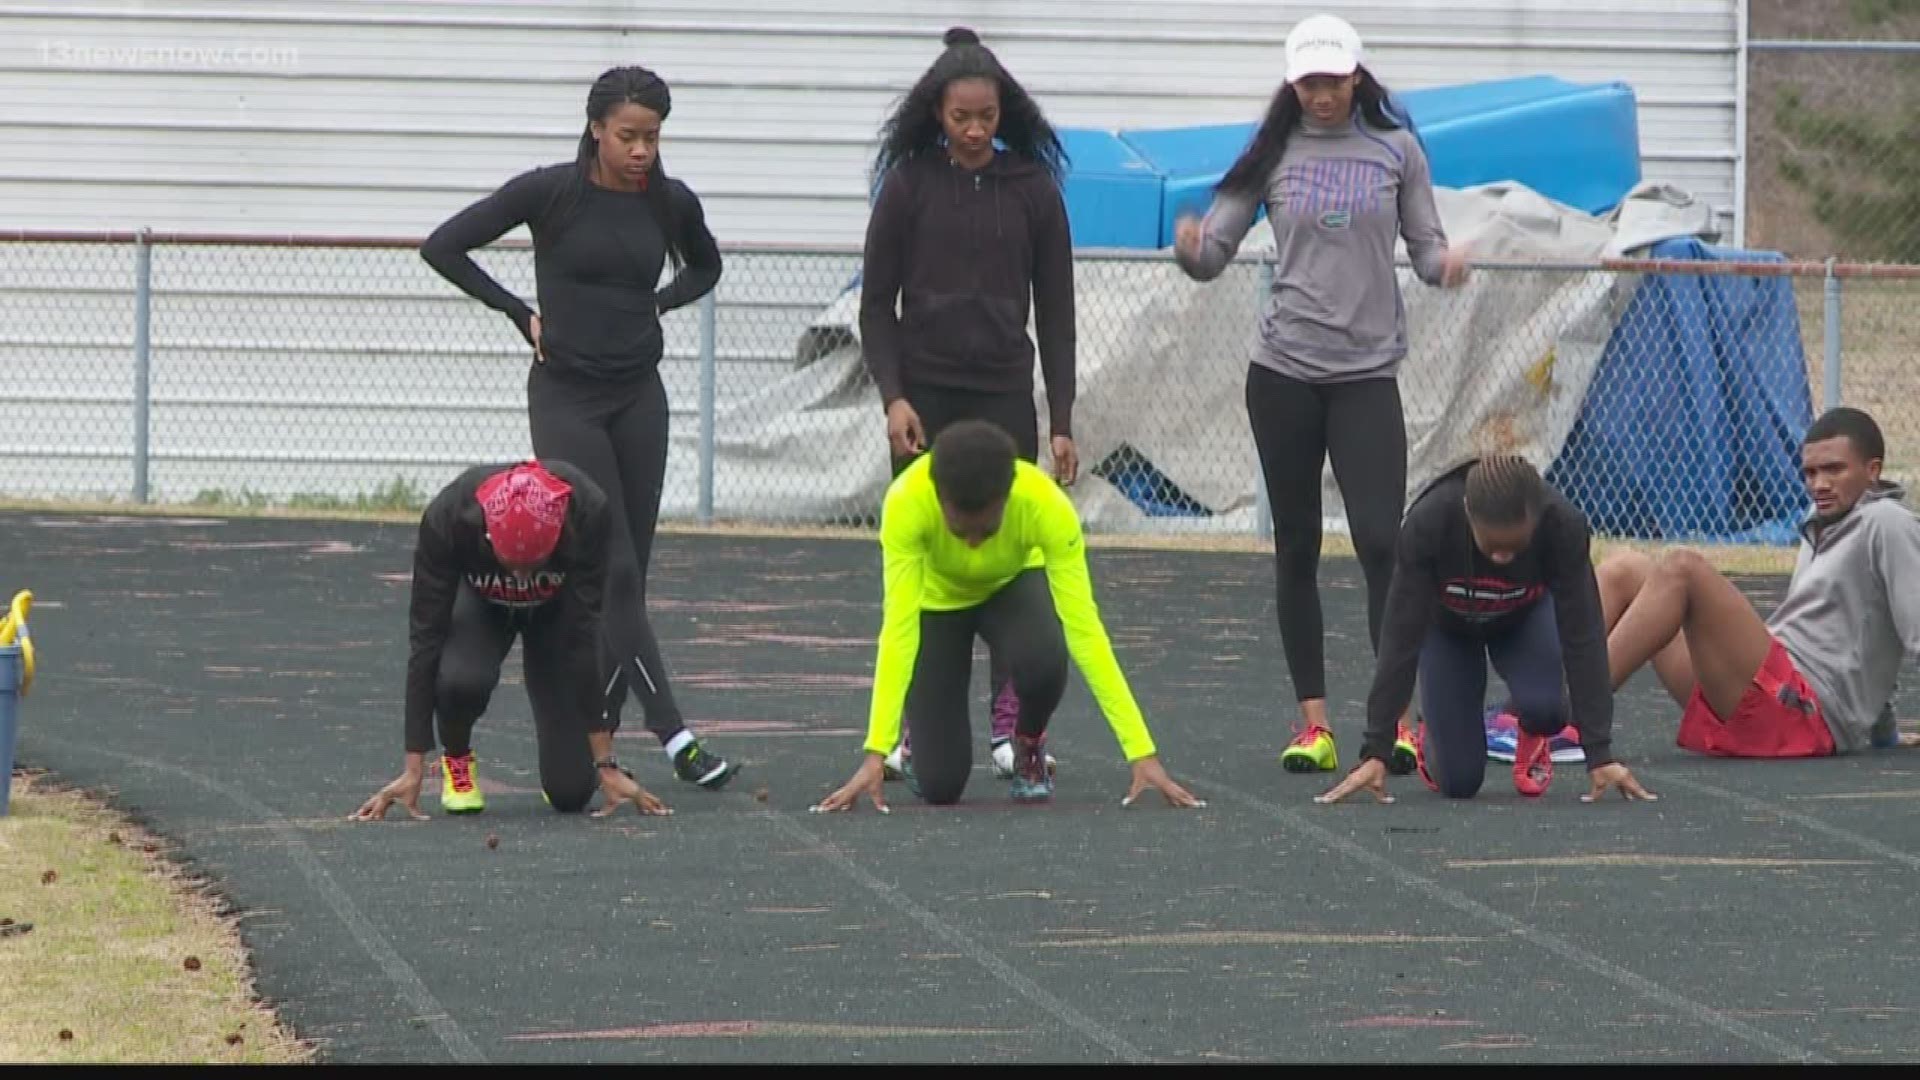 The Warriors 4x200 meter girl's relay team just made some big noise at the national level.